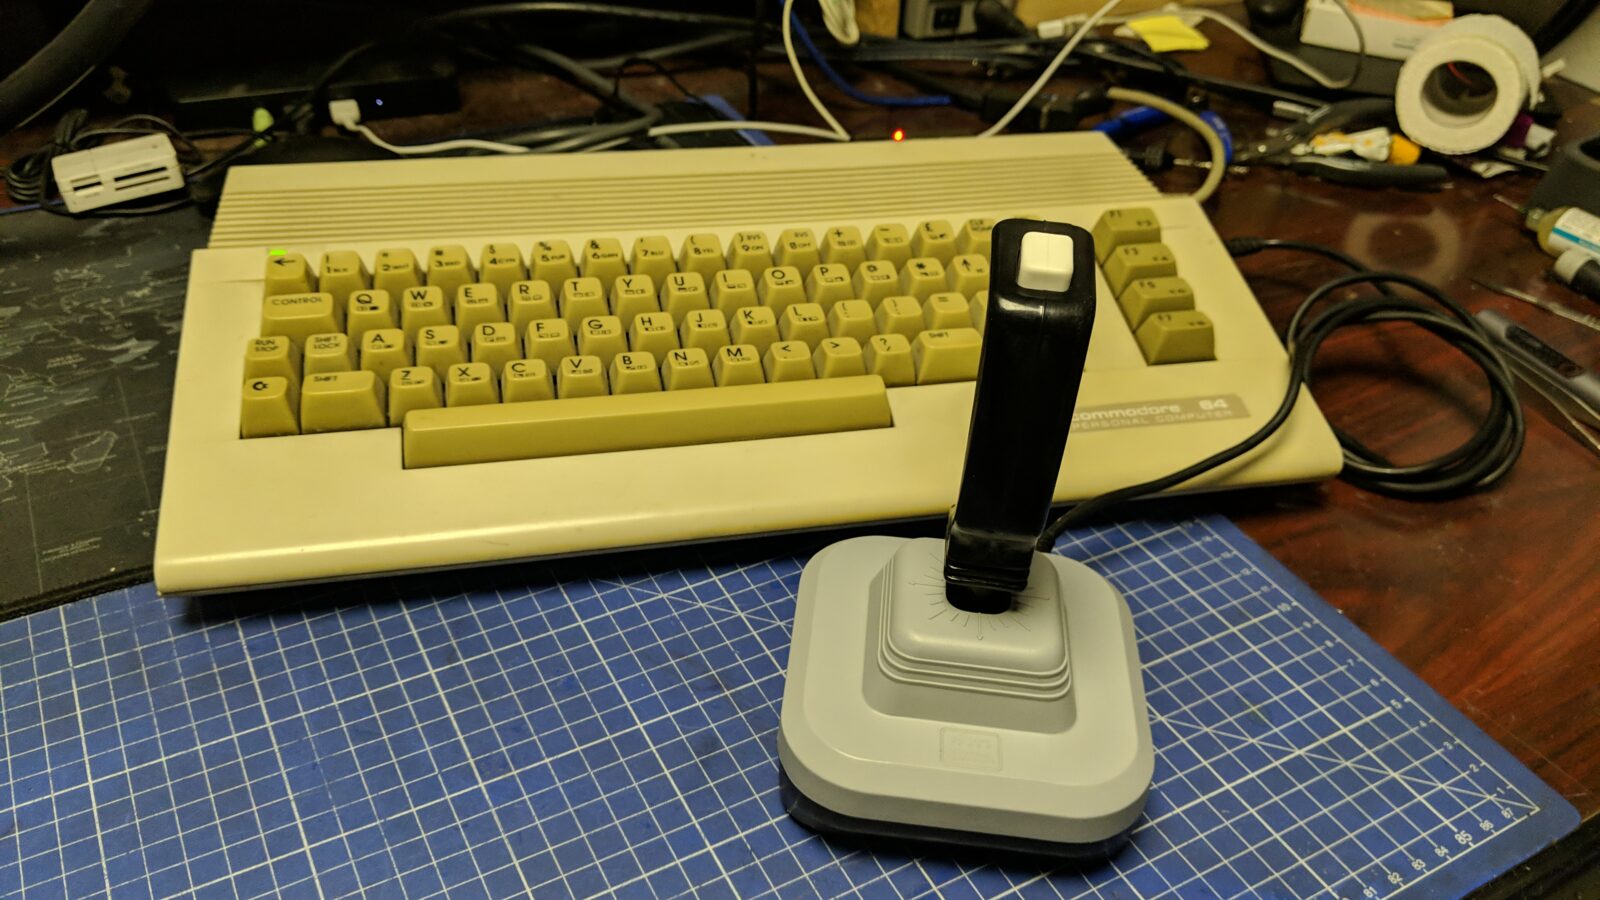 Wico Boss Joystick Modded To Use Cherry MX Keyboard Switches